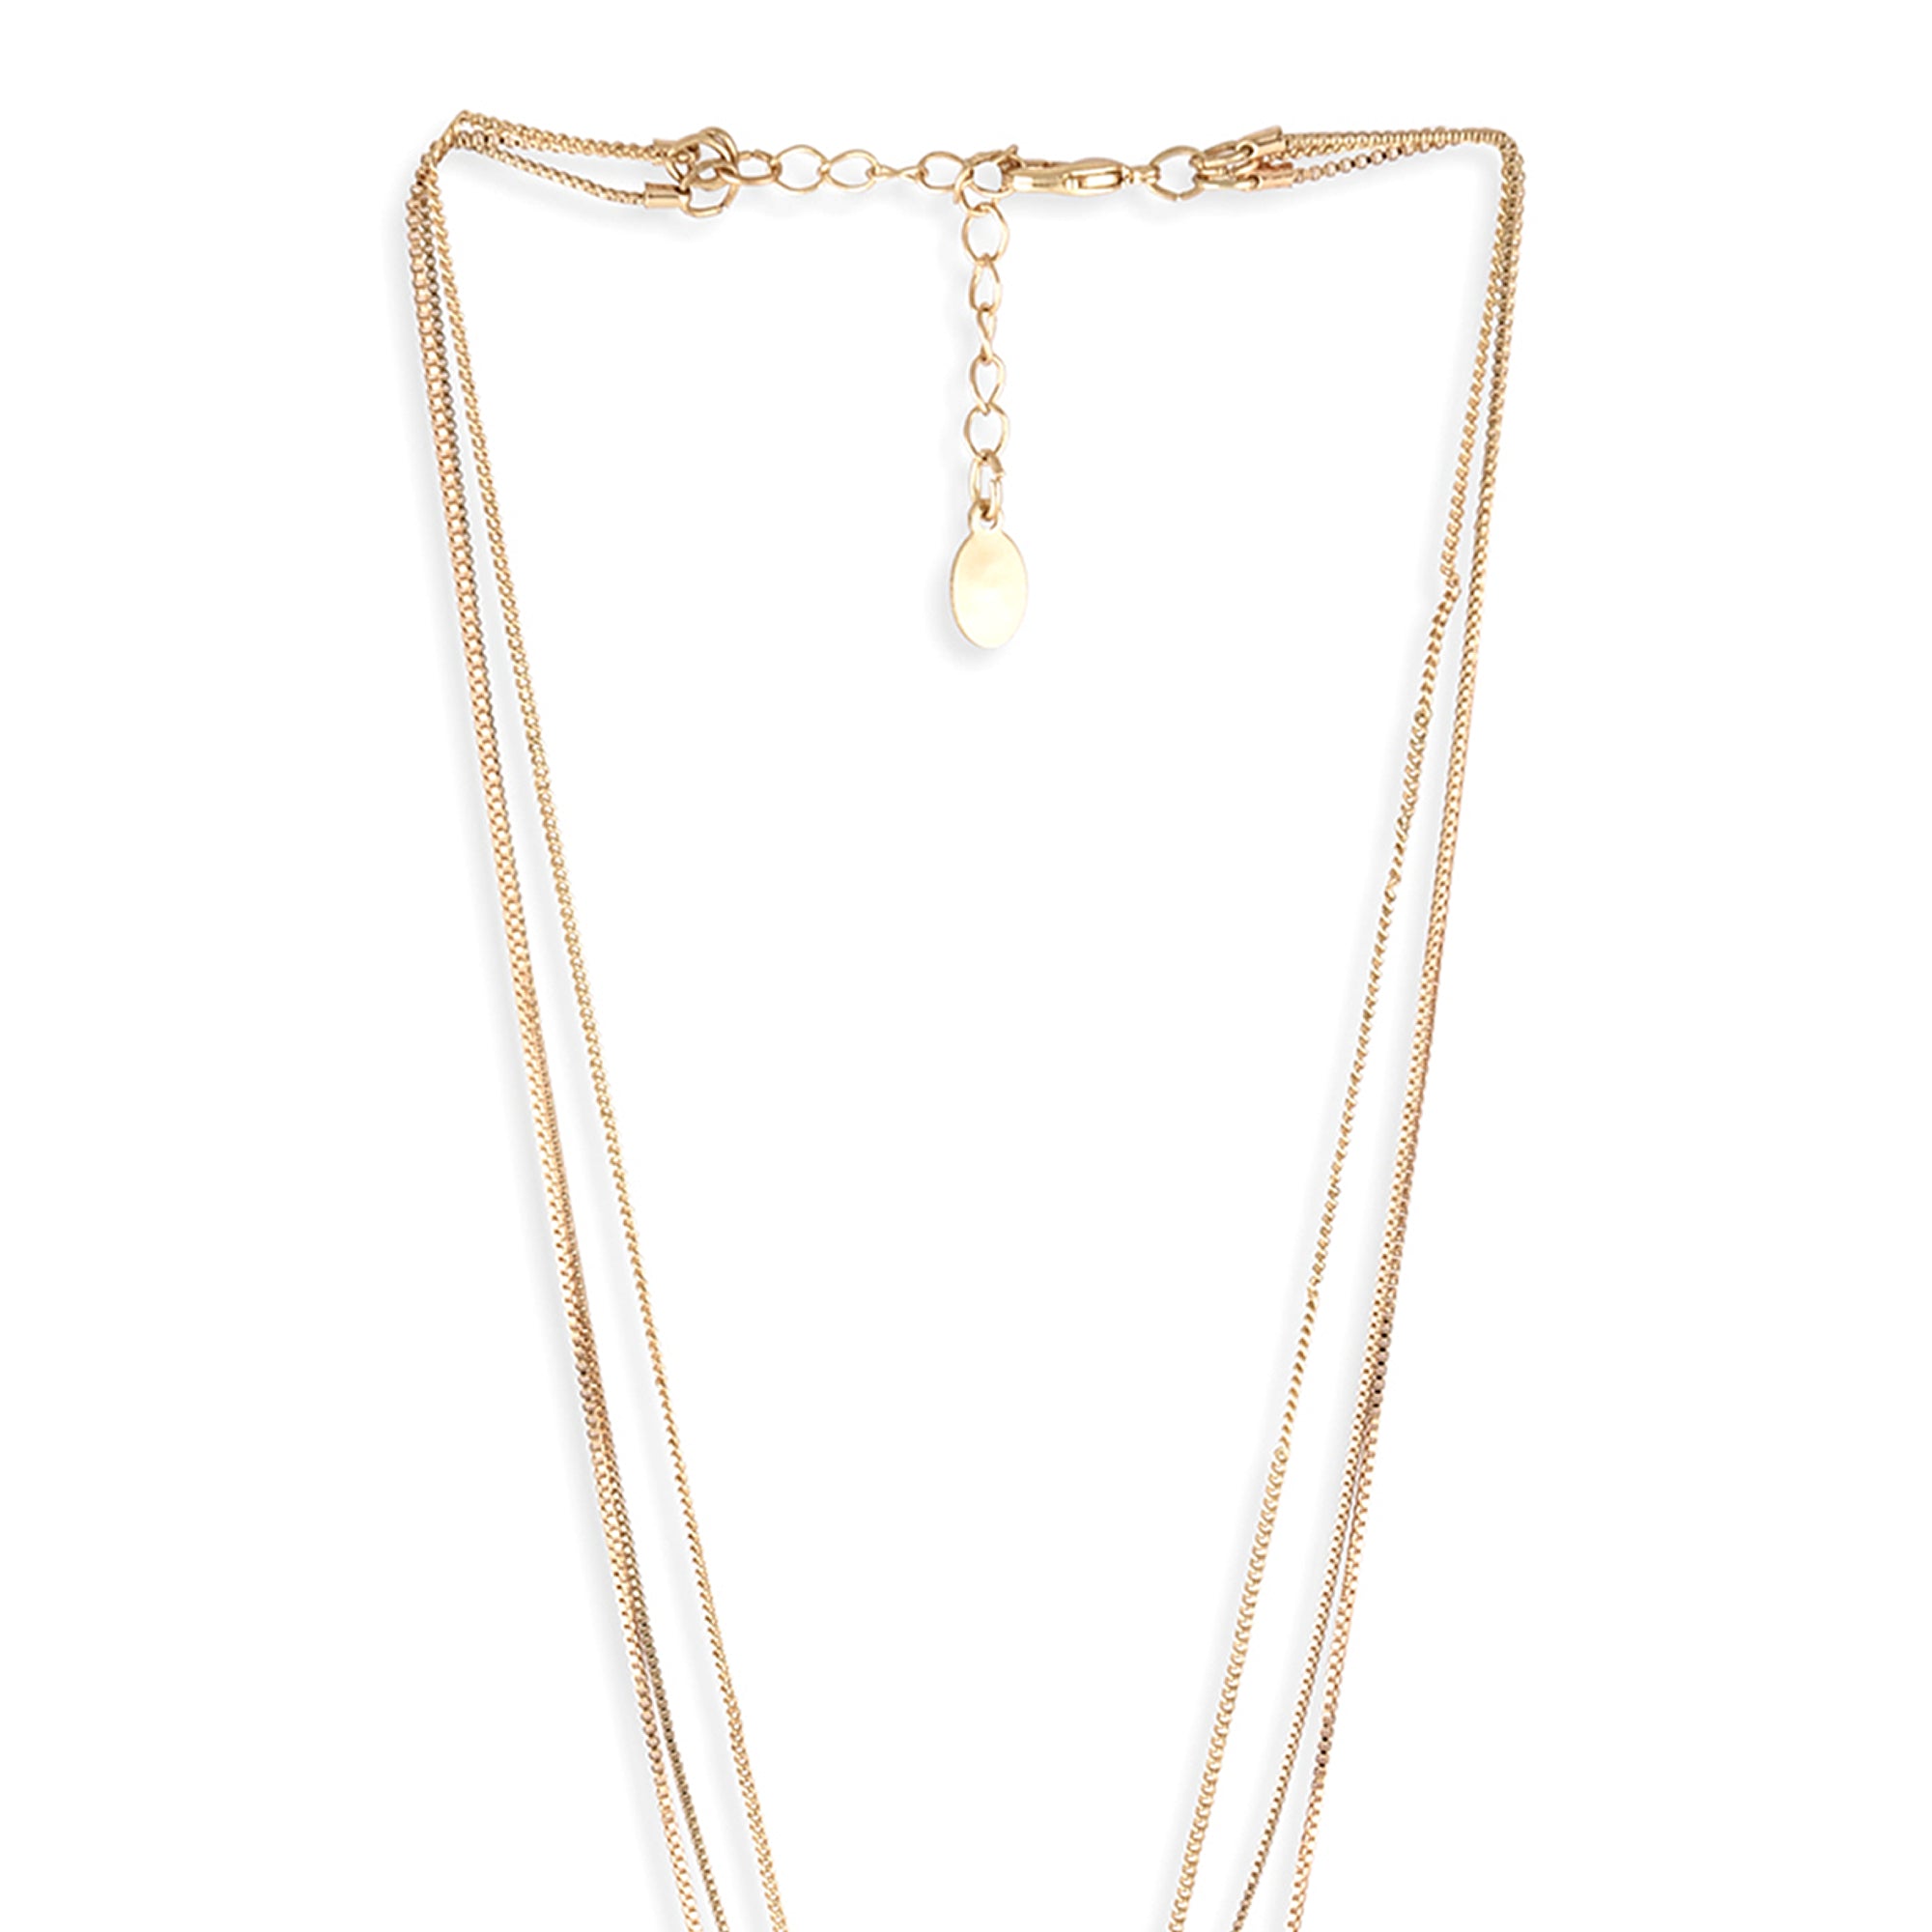 Accessorize London Women'S Simple Discs Layered Necklace